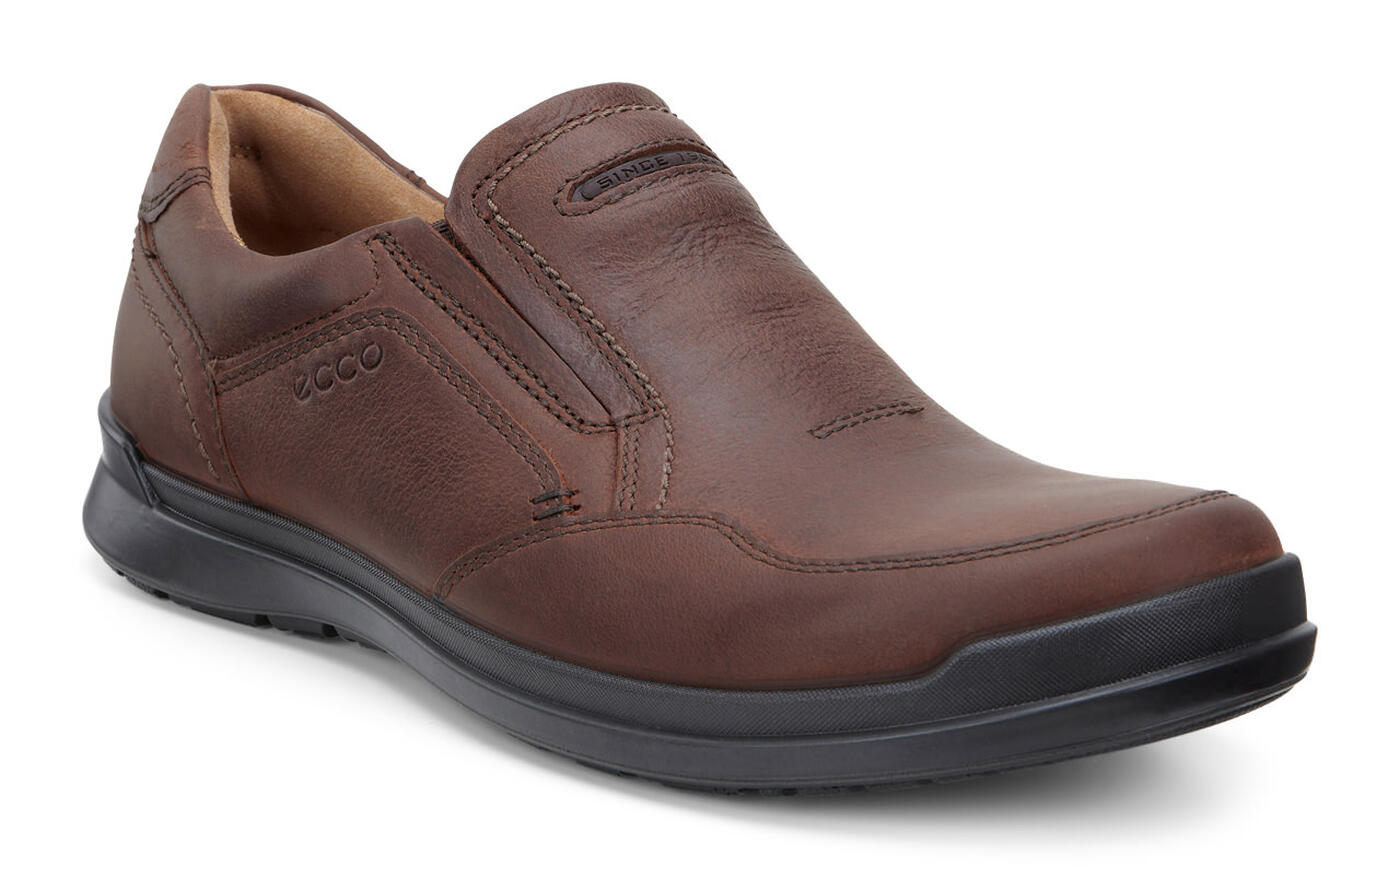 ECCO Howell Slip On | Men's Shoes | ECCO® Shoes